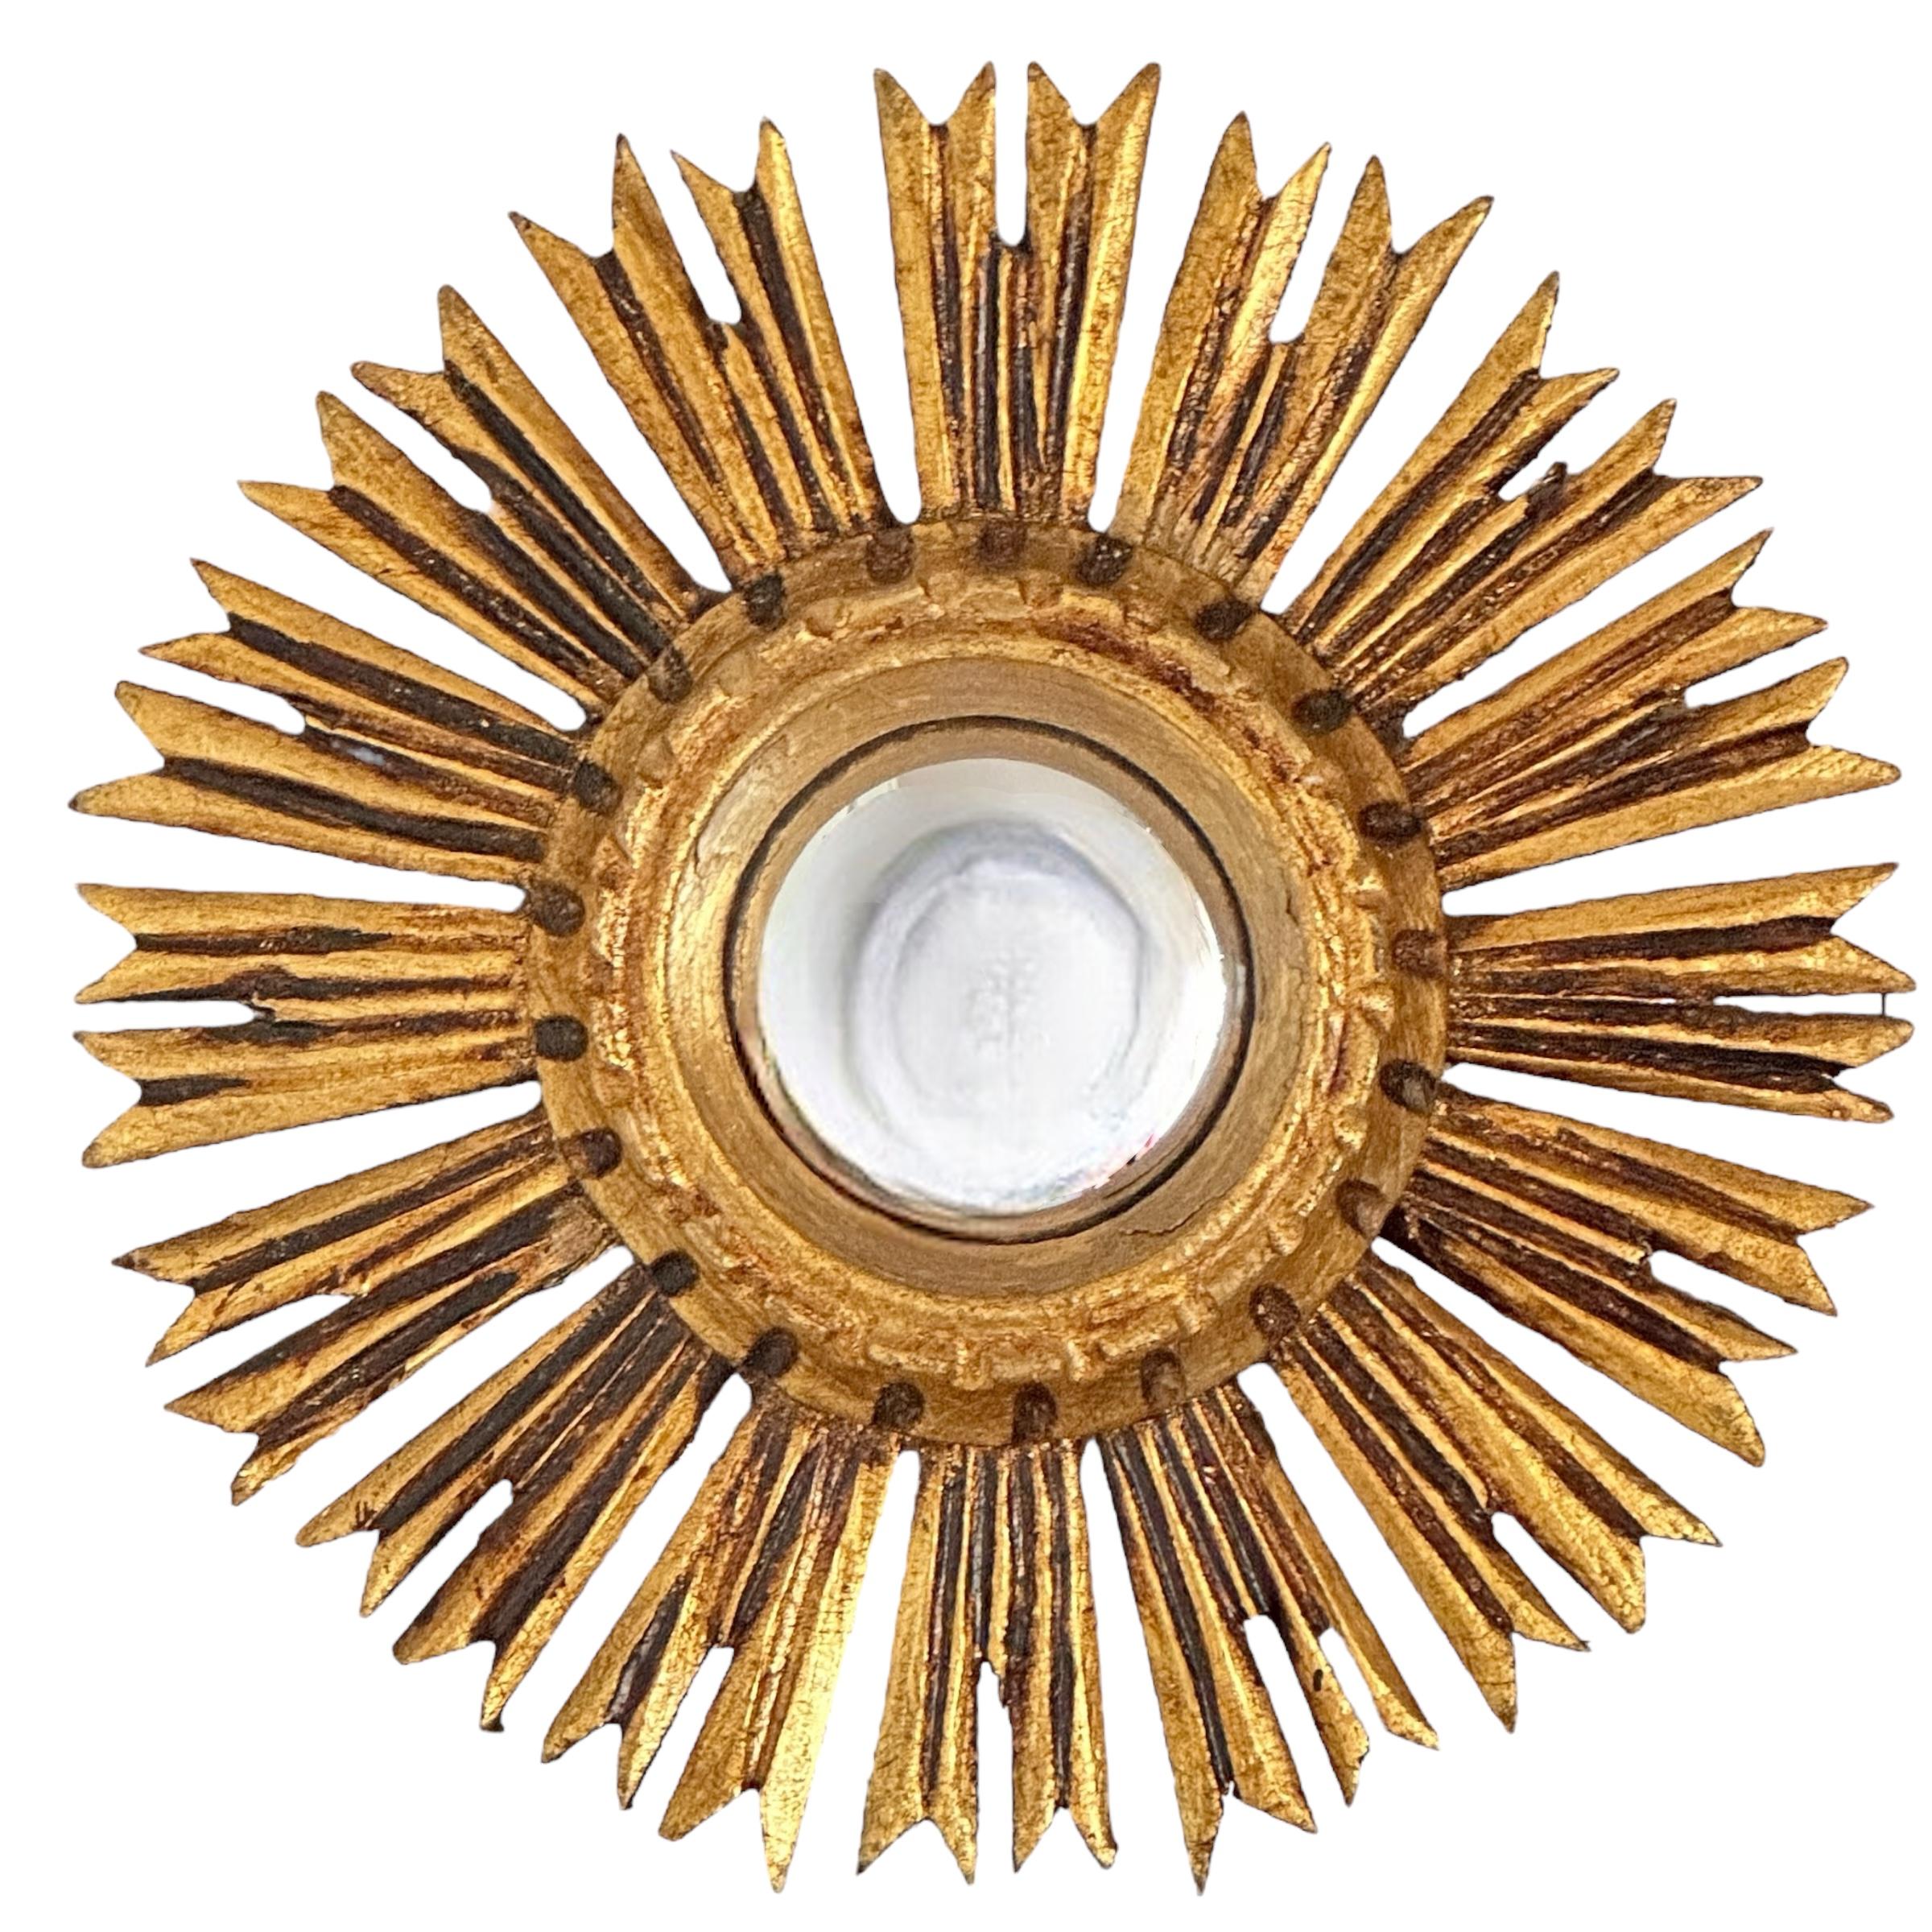 A gorgeous starburst sunburst convex mirror. Made of gilded wood. No chips, no cracks, no repairs. It measures approximate: 11.38